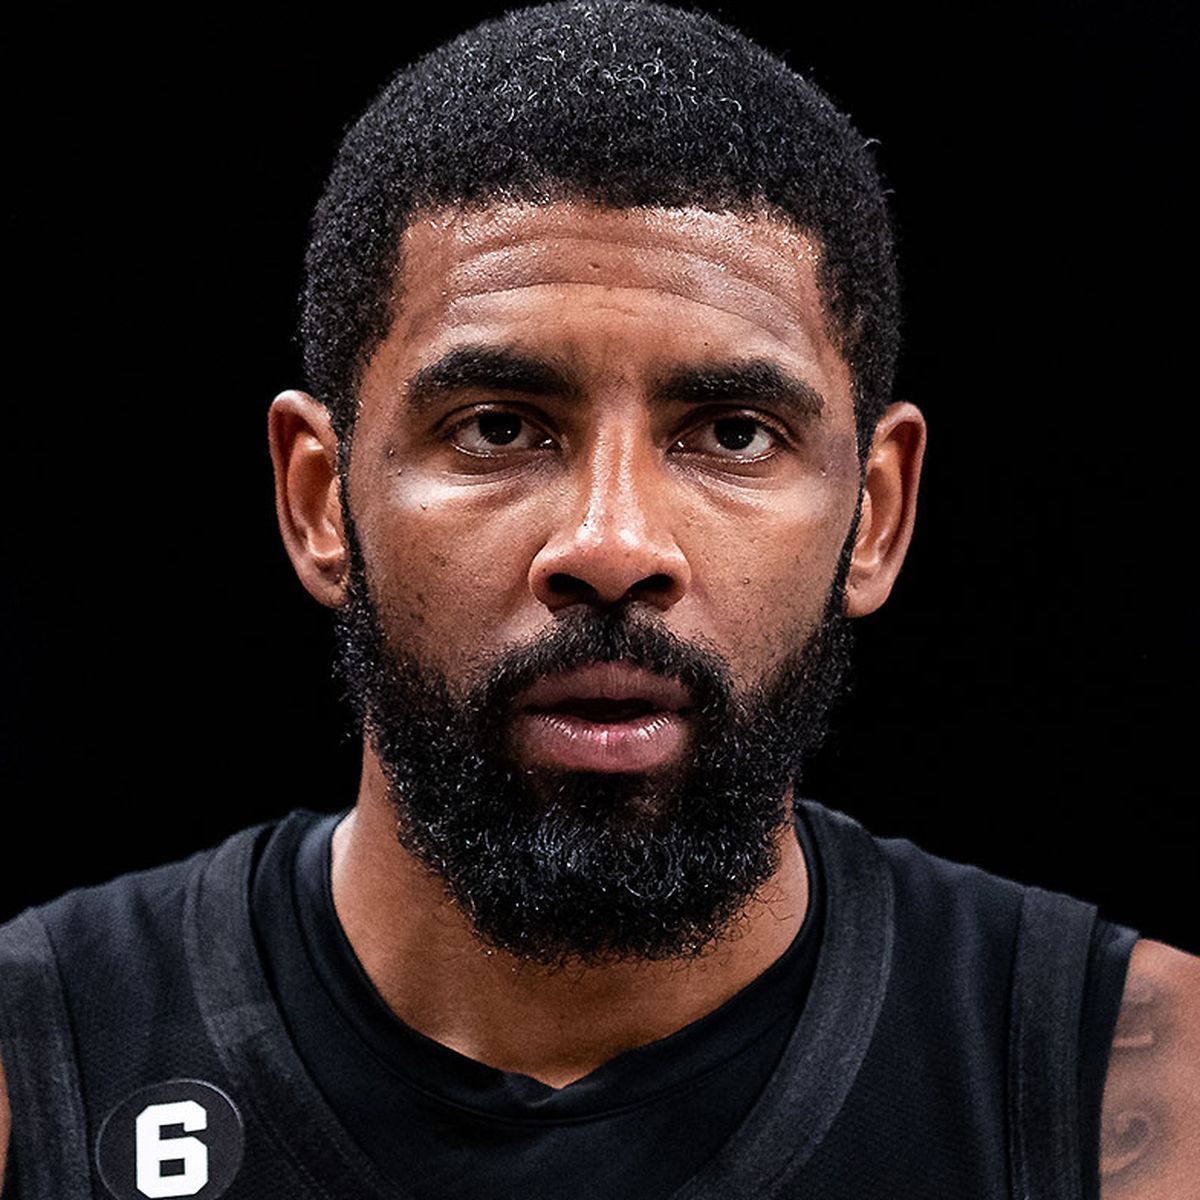 Nike says Nets' Kyrie Irving no longer one of its athletes